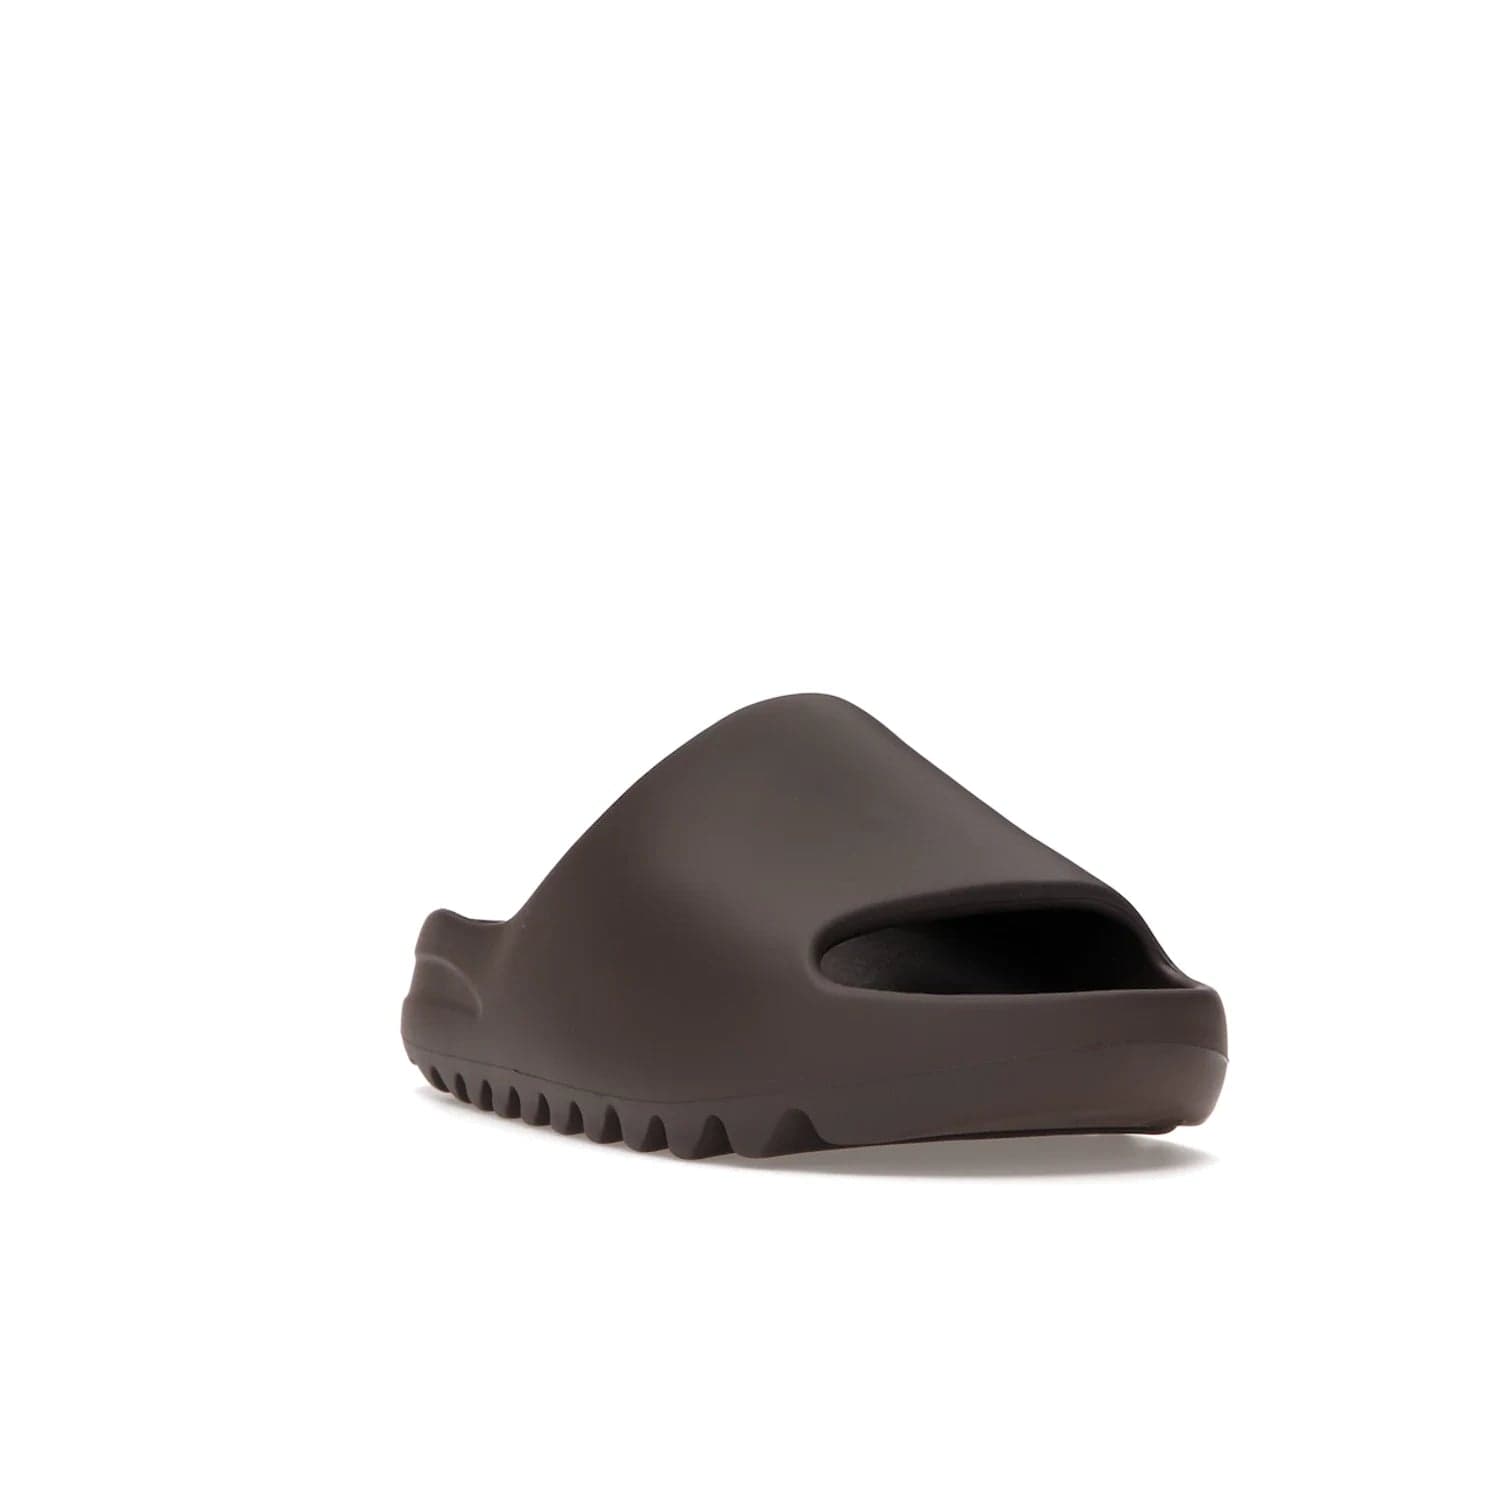 adidas Yeezy Slide Soot - Image 7 - Only at www.BallersClubKickz.com - Shop the Yeezy Slide Soot sneaker by Adidas, a sleek blend of form and function. Monochrome silhouette in Soot/Soot/Soot. Lightweight EVA foam offers comfort and durability. Get the must-have style today.